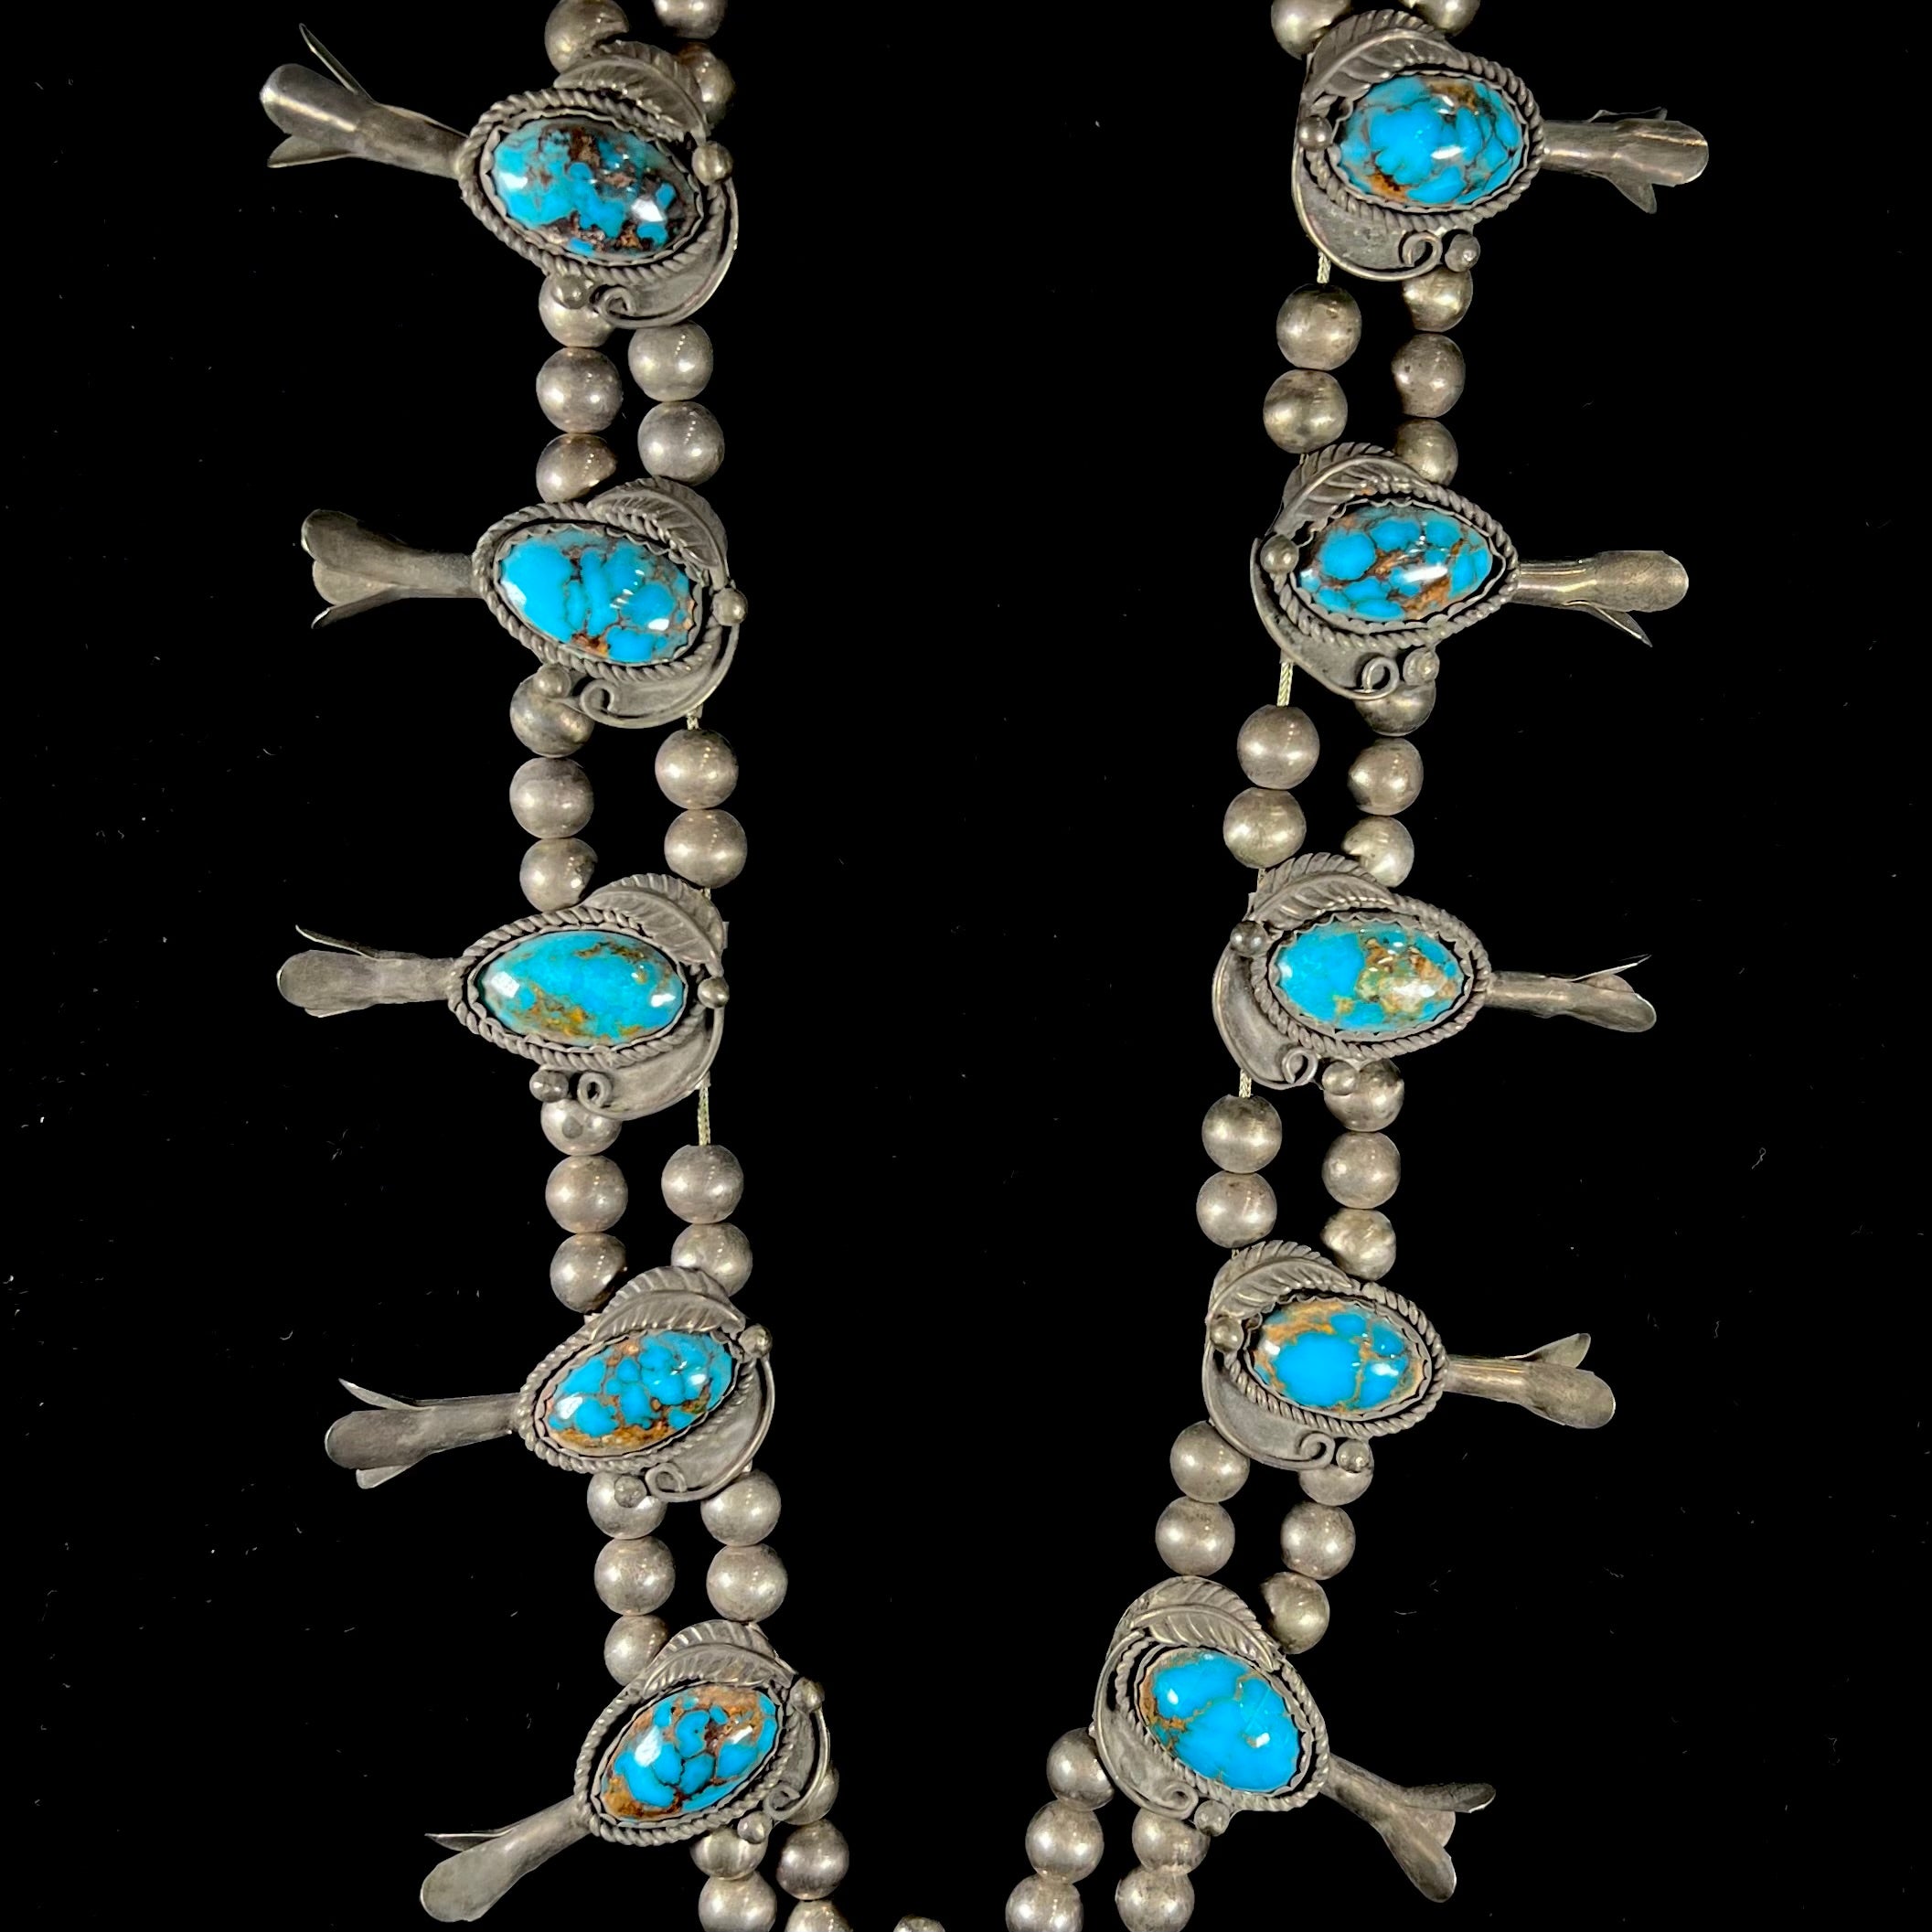 Spiny Oyster Squash Blossom Necklace with Earrings – Silver Eagle Gallery